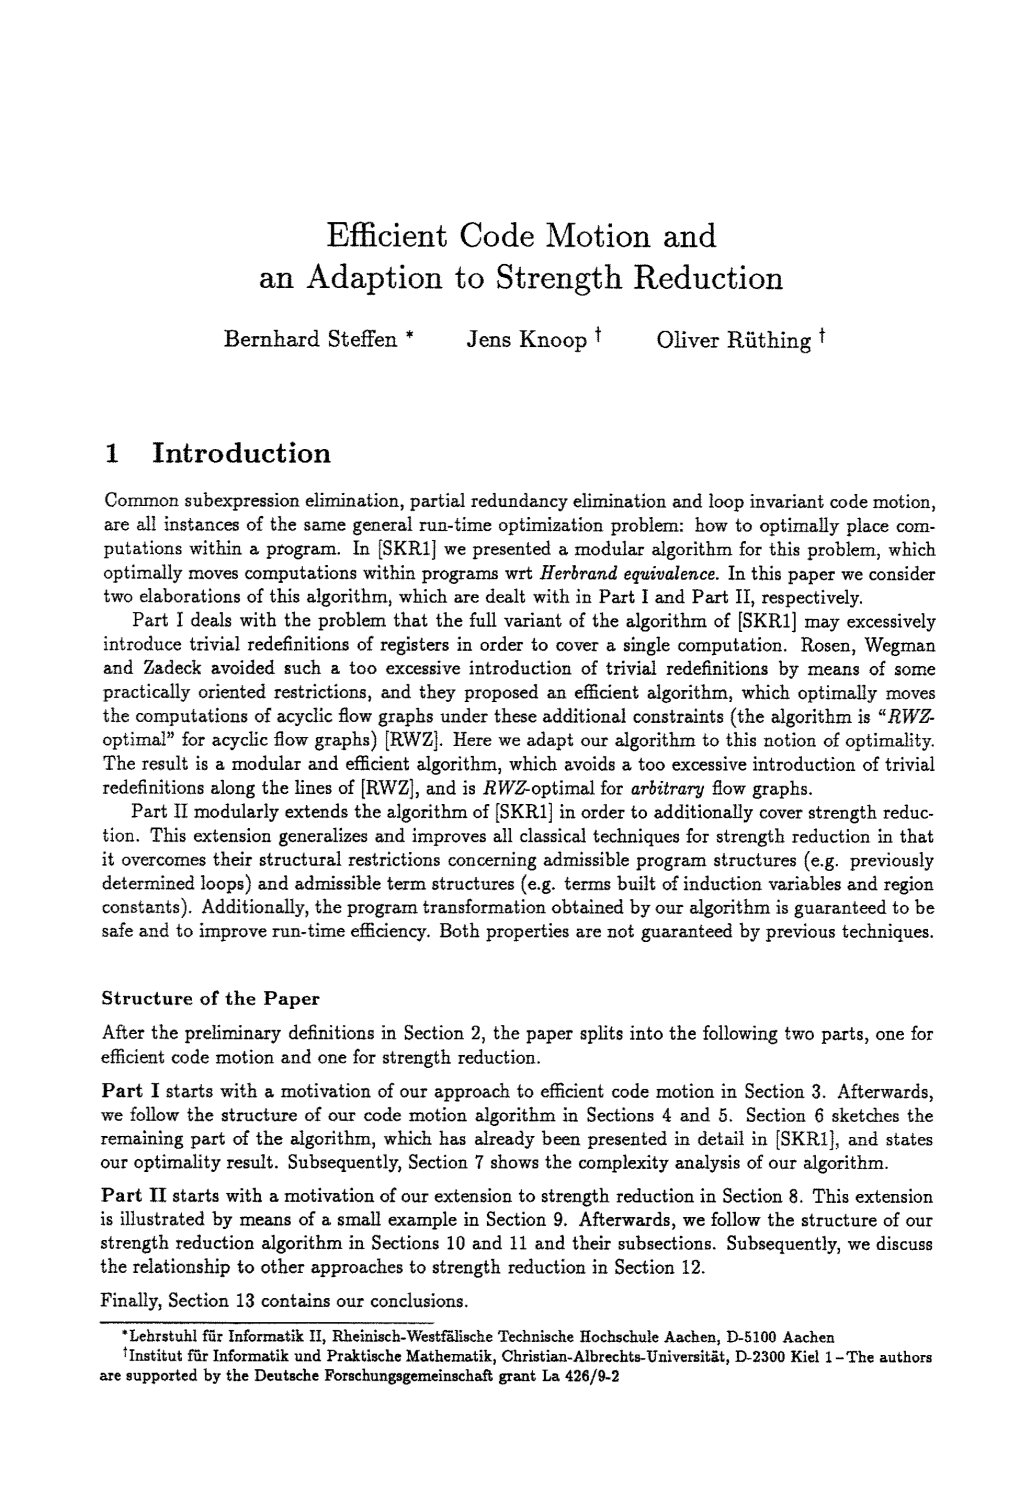 Efficient Code Motion and an Adaption to Strength Reduction